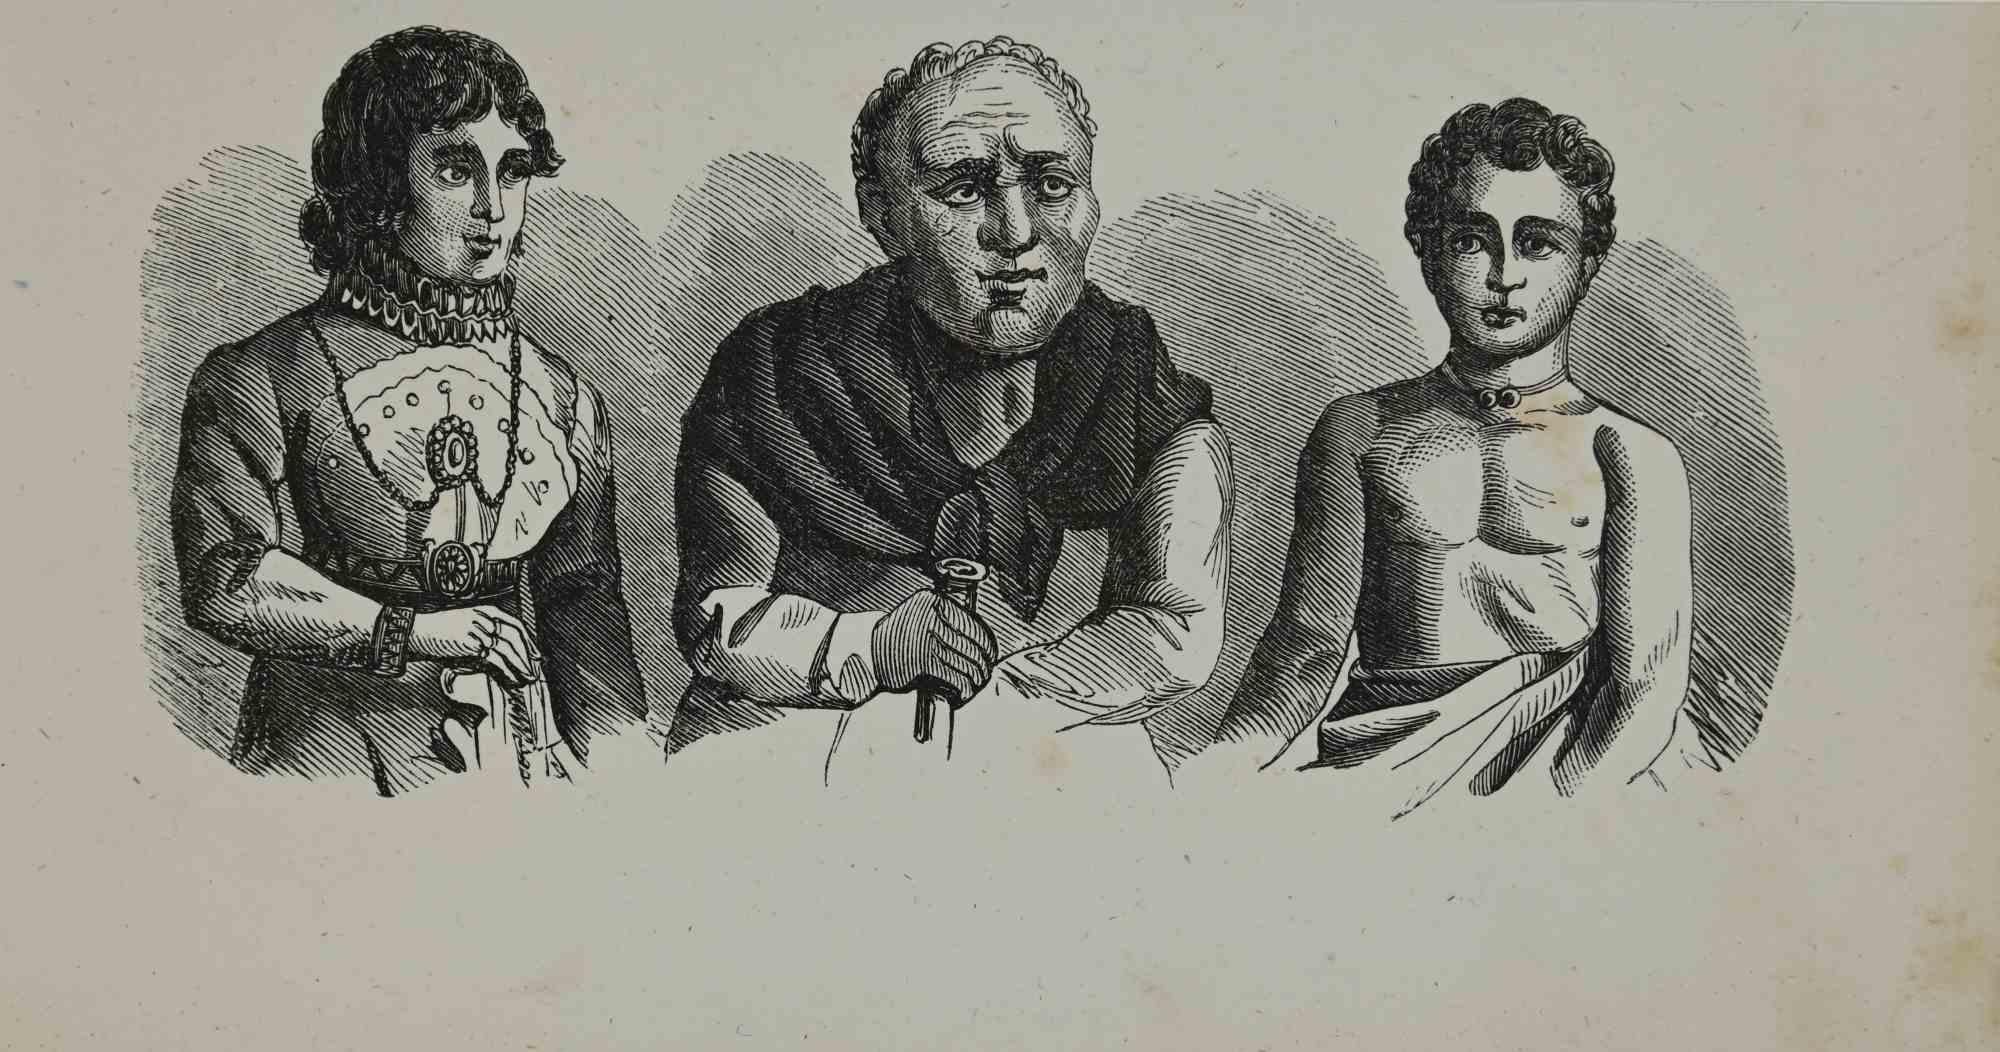 Unknown Figurative Print - Figures - Costumes - Lithograph - 1862